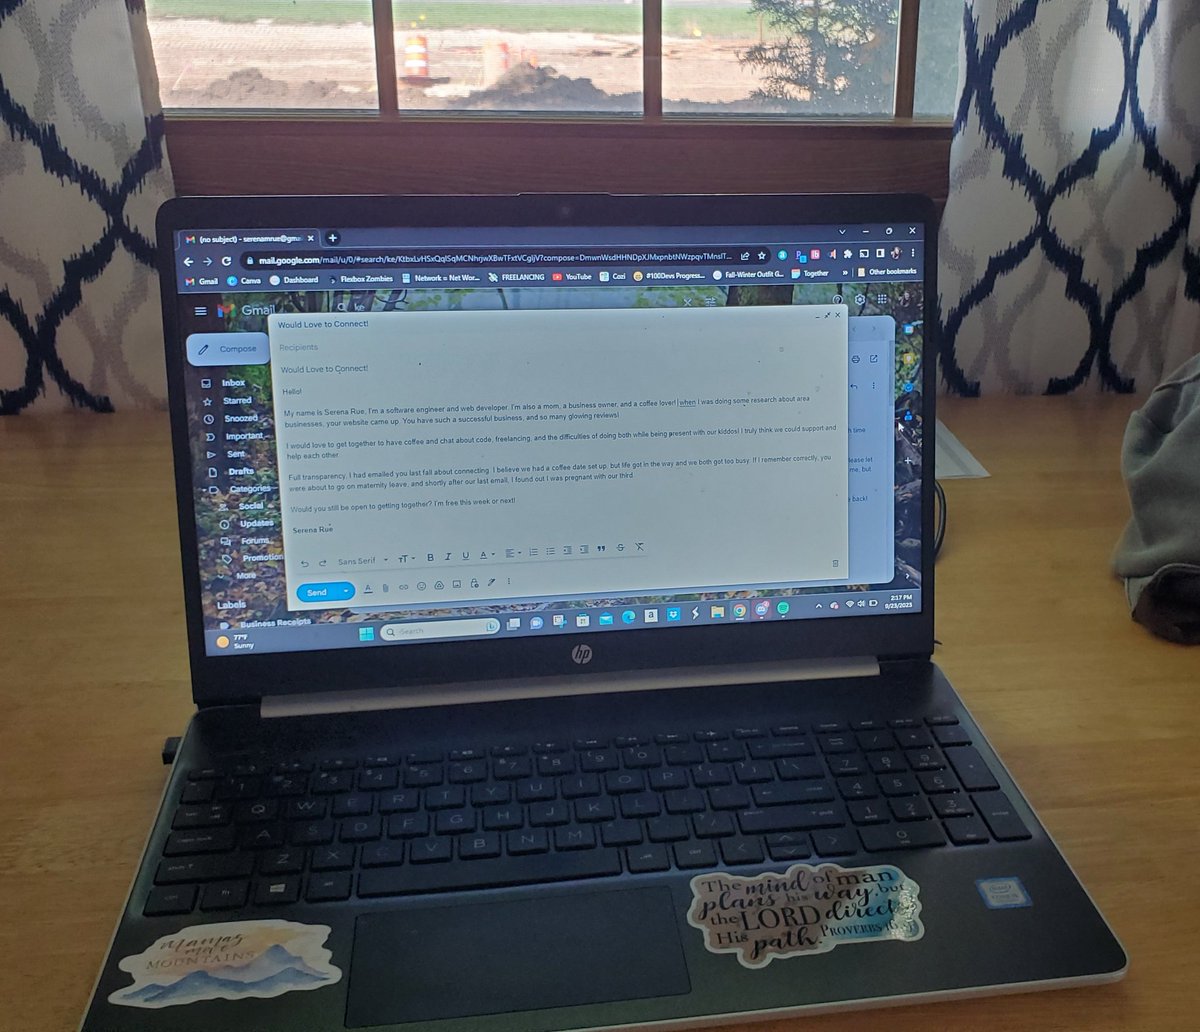 Laptops are, indeed, portable! Making a late lunch/lupper for the kids and sending some #networking emails 💪
#momswhocode #womenwhocode #learninpublic #100devs